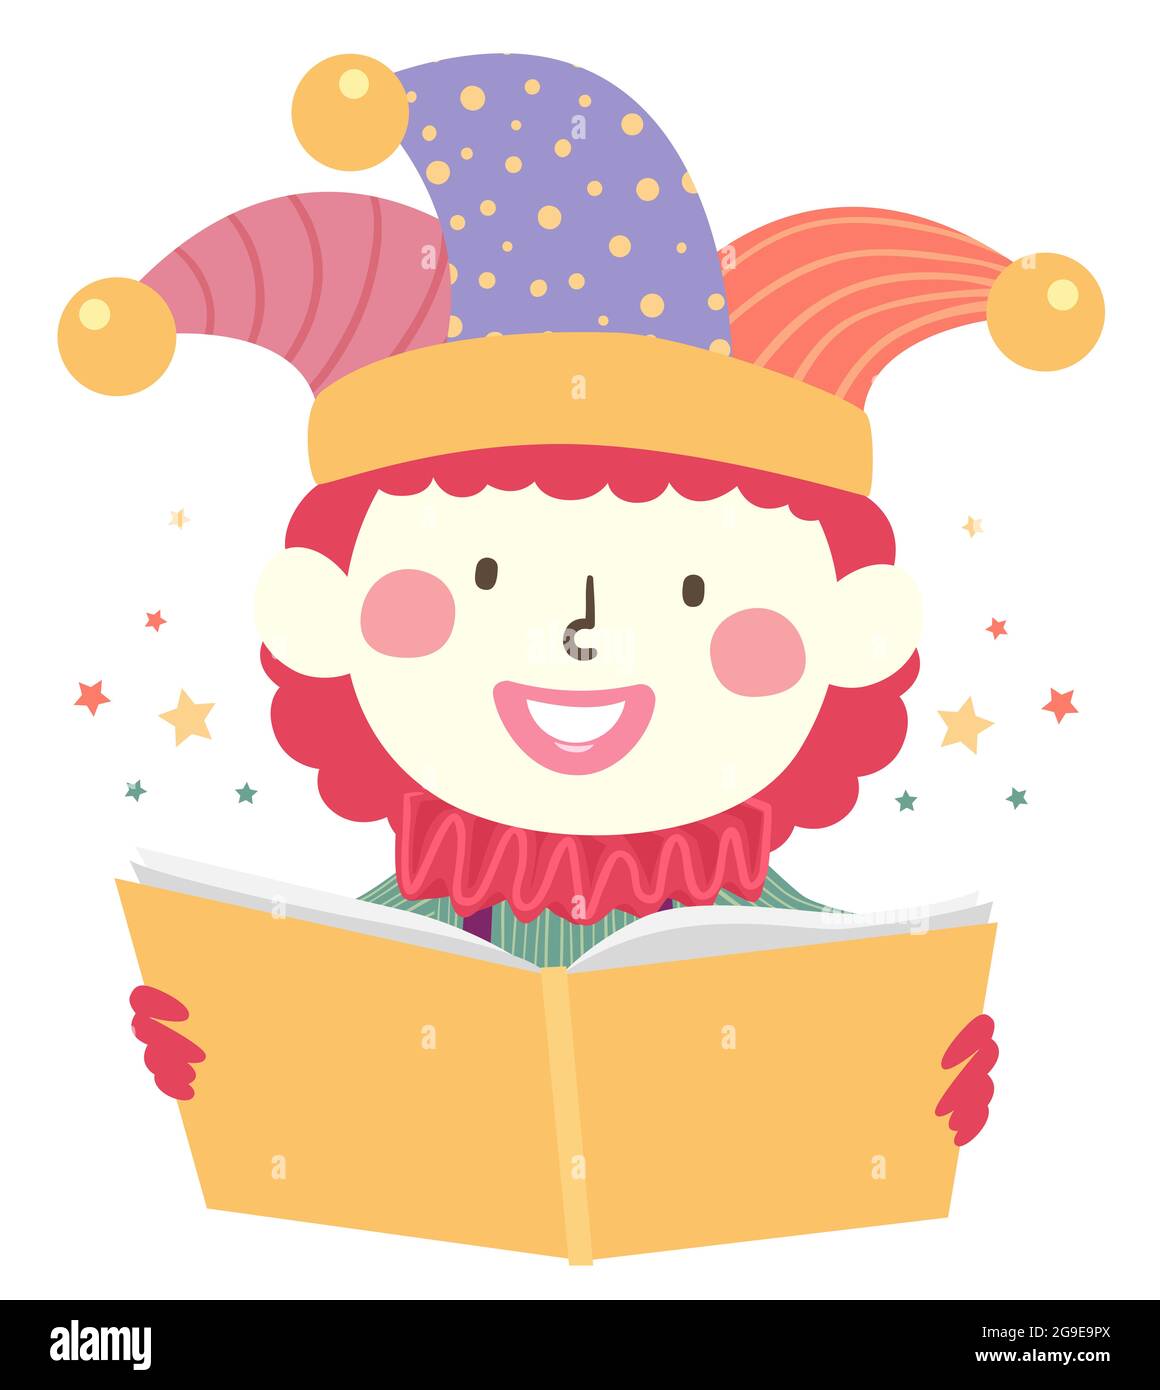 Illustration of a Kid Boy Clown Reading a Story Book Stock Photo